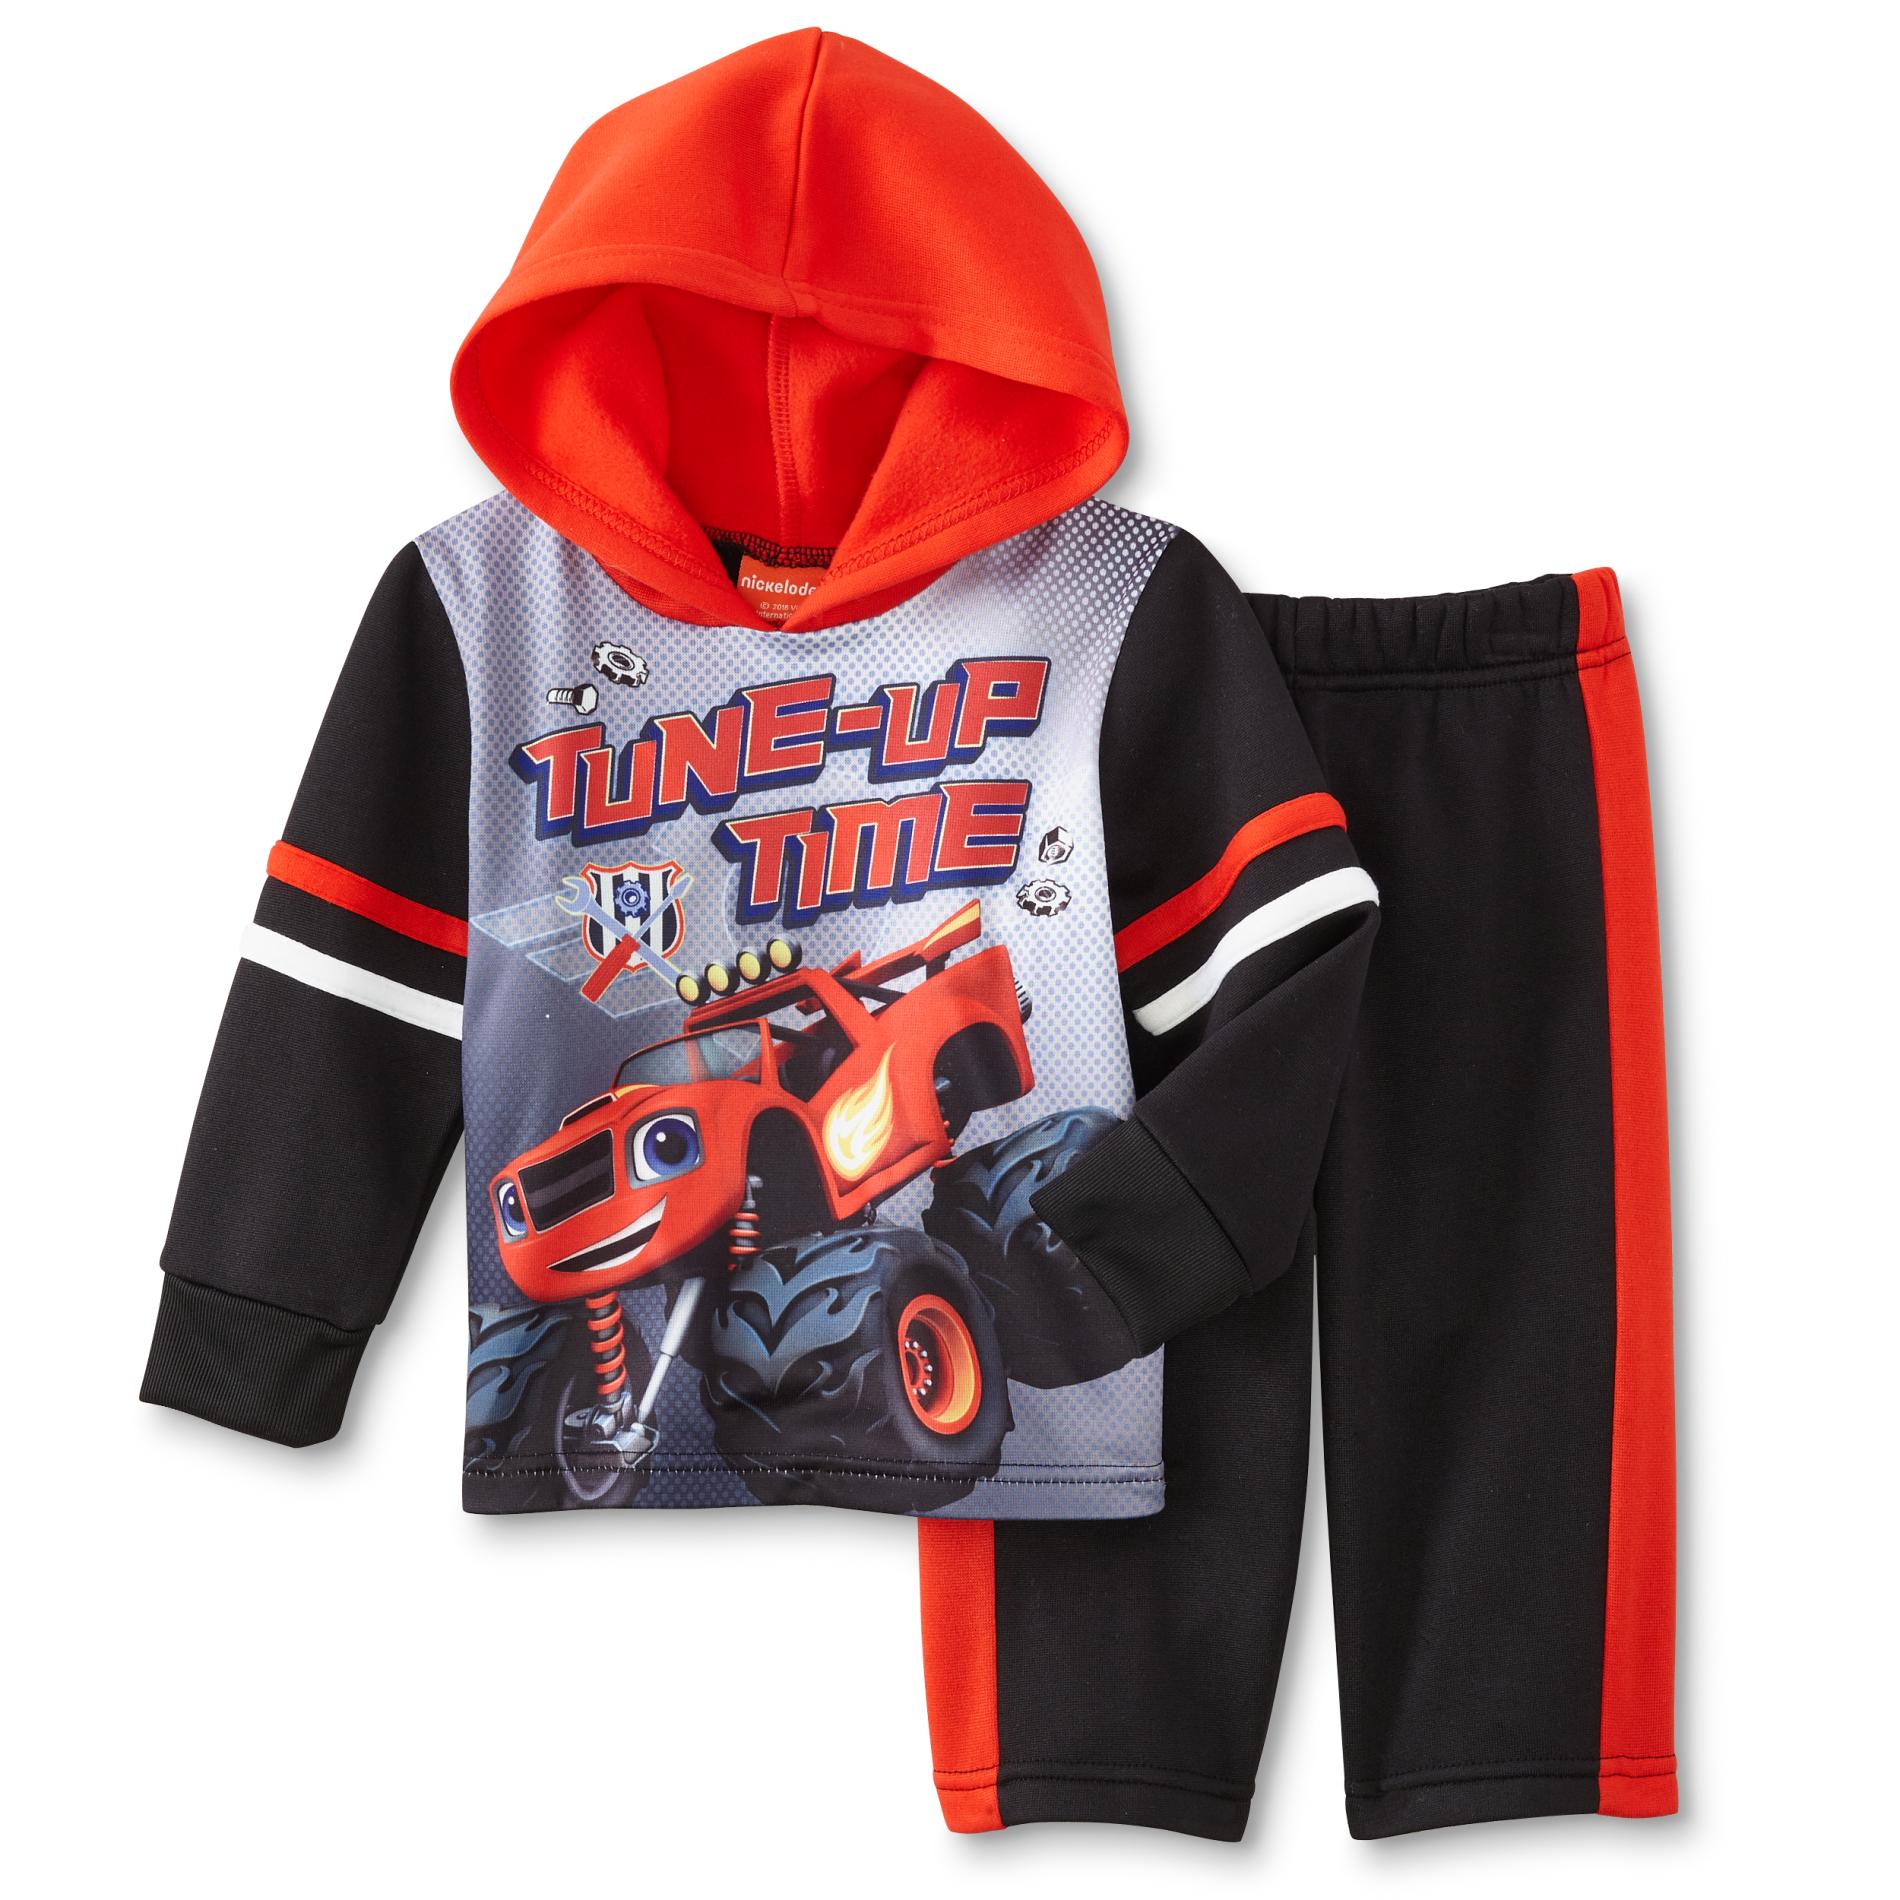 Nickelodeon Blaze & the Monster Machines Infant & Toddler Boys' Hoodie & Knit Pants